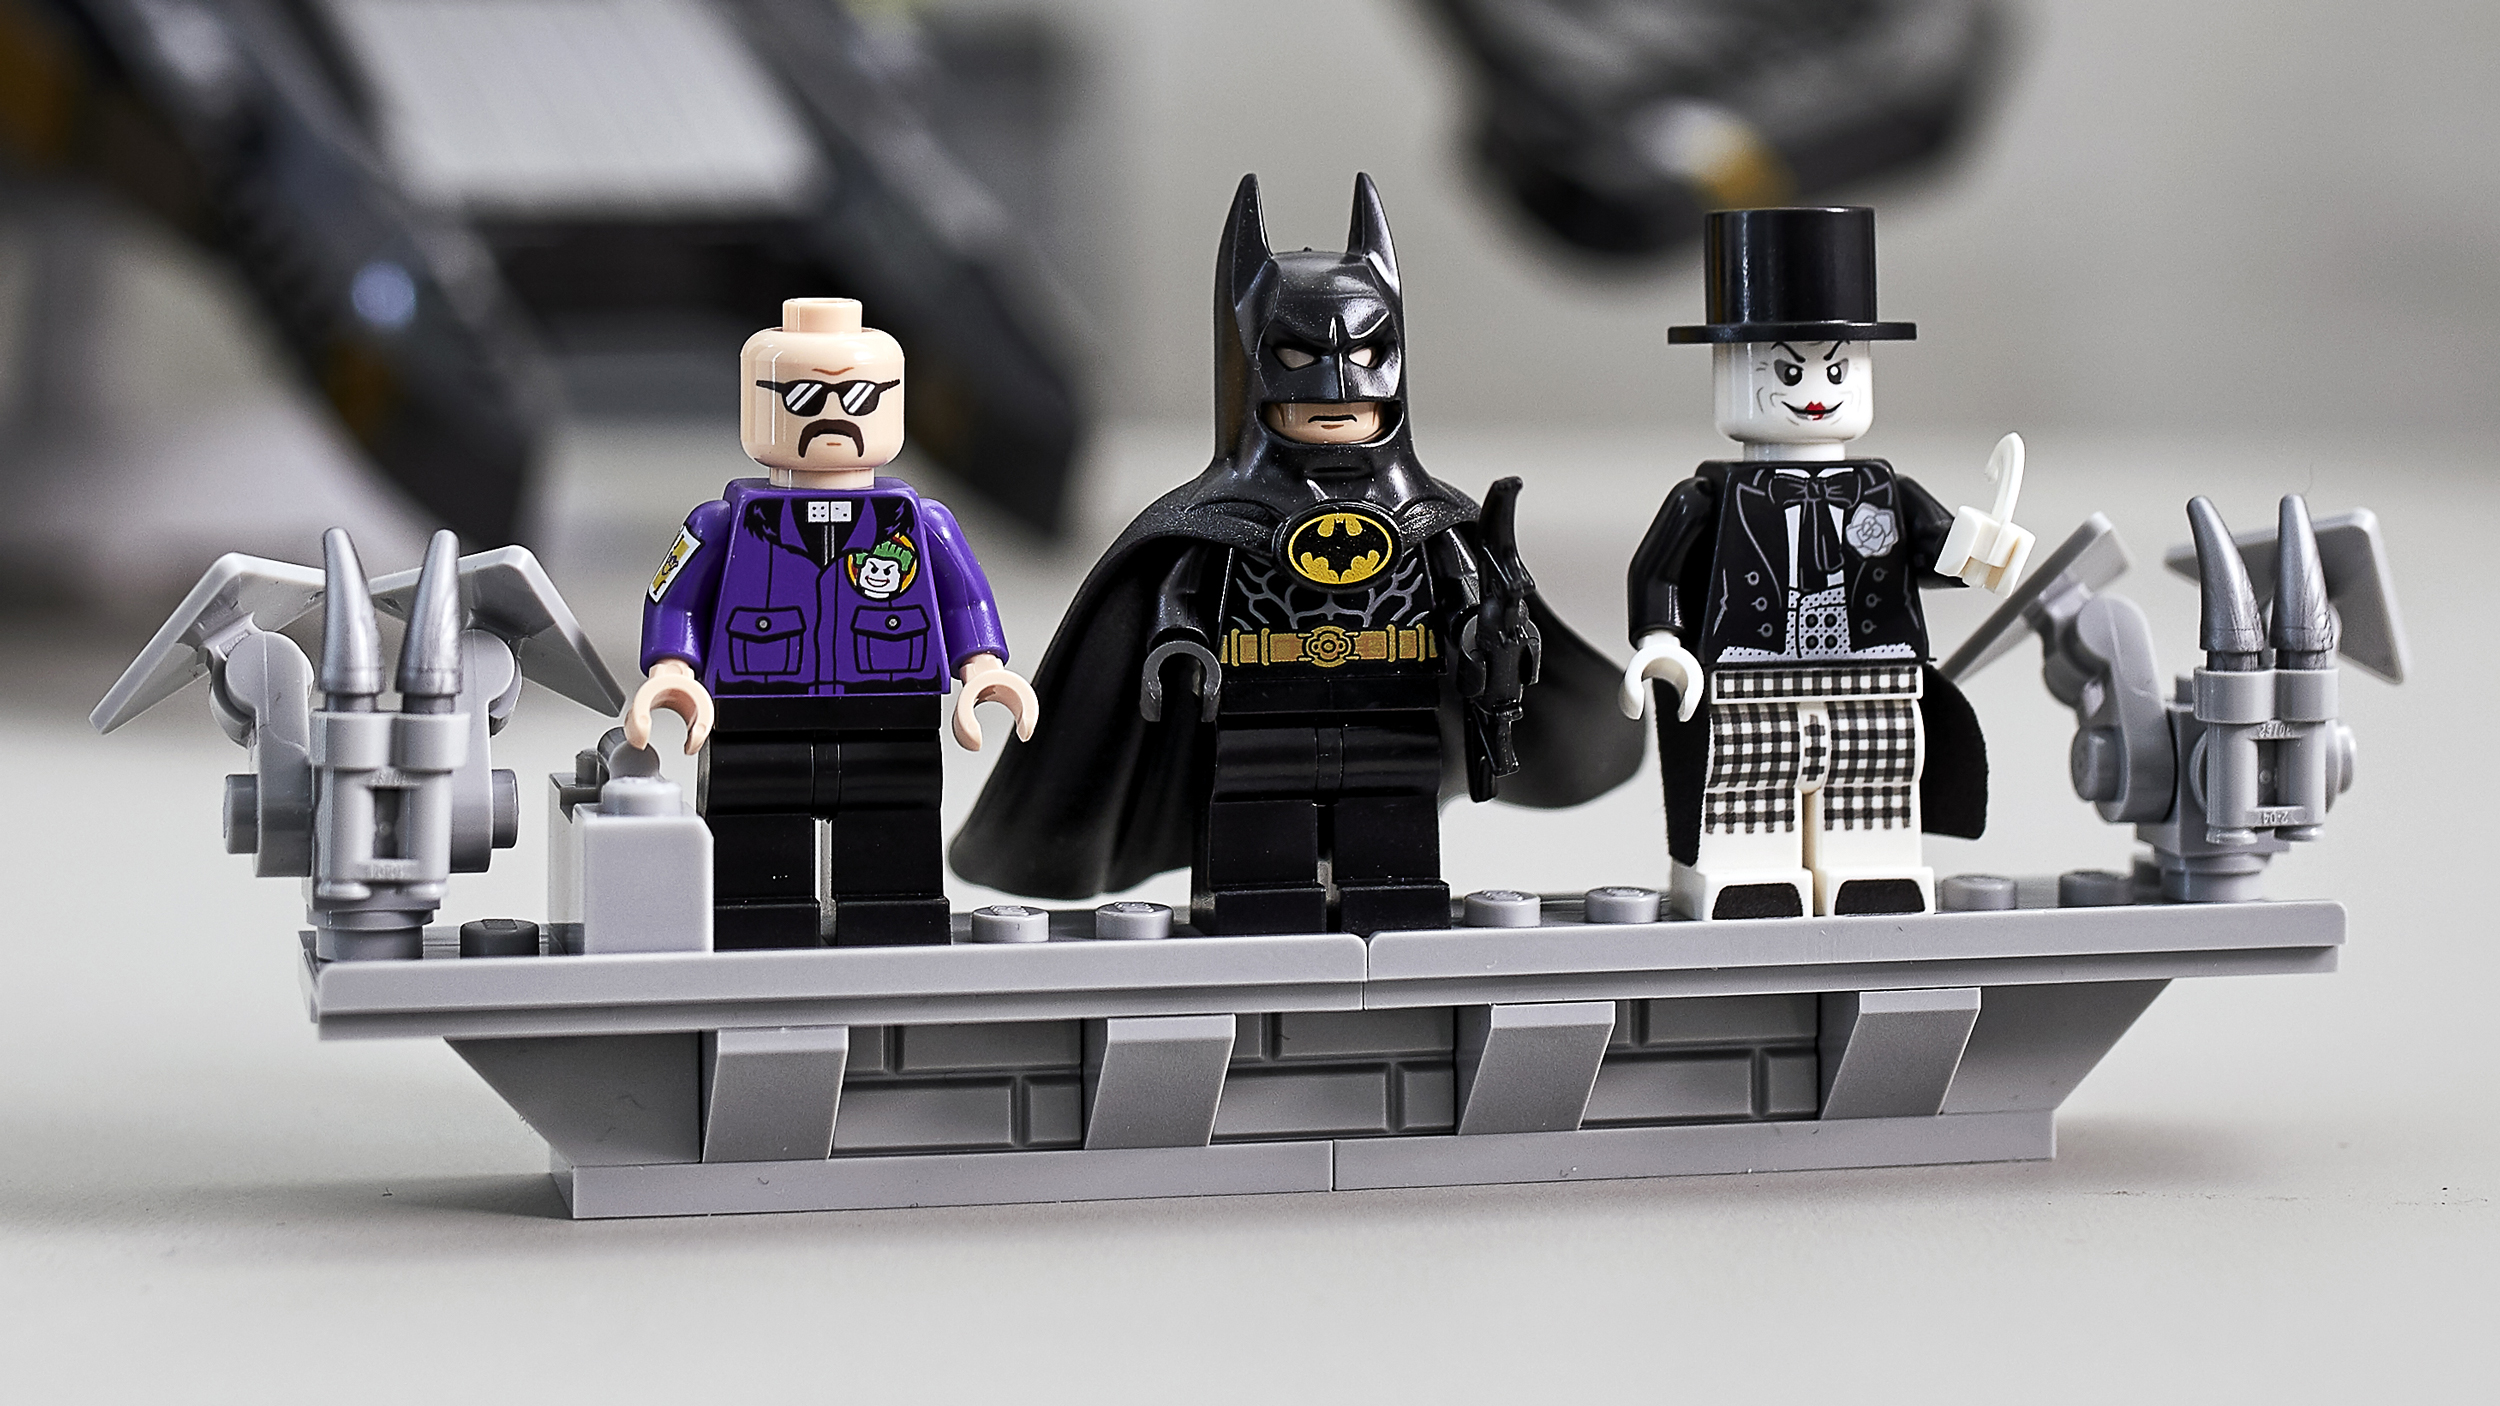 Three minifigures are included with Lego's 1989 Batwing. (Image: Lego)